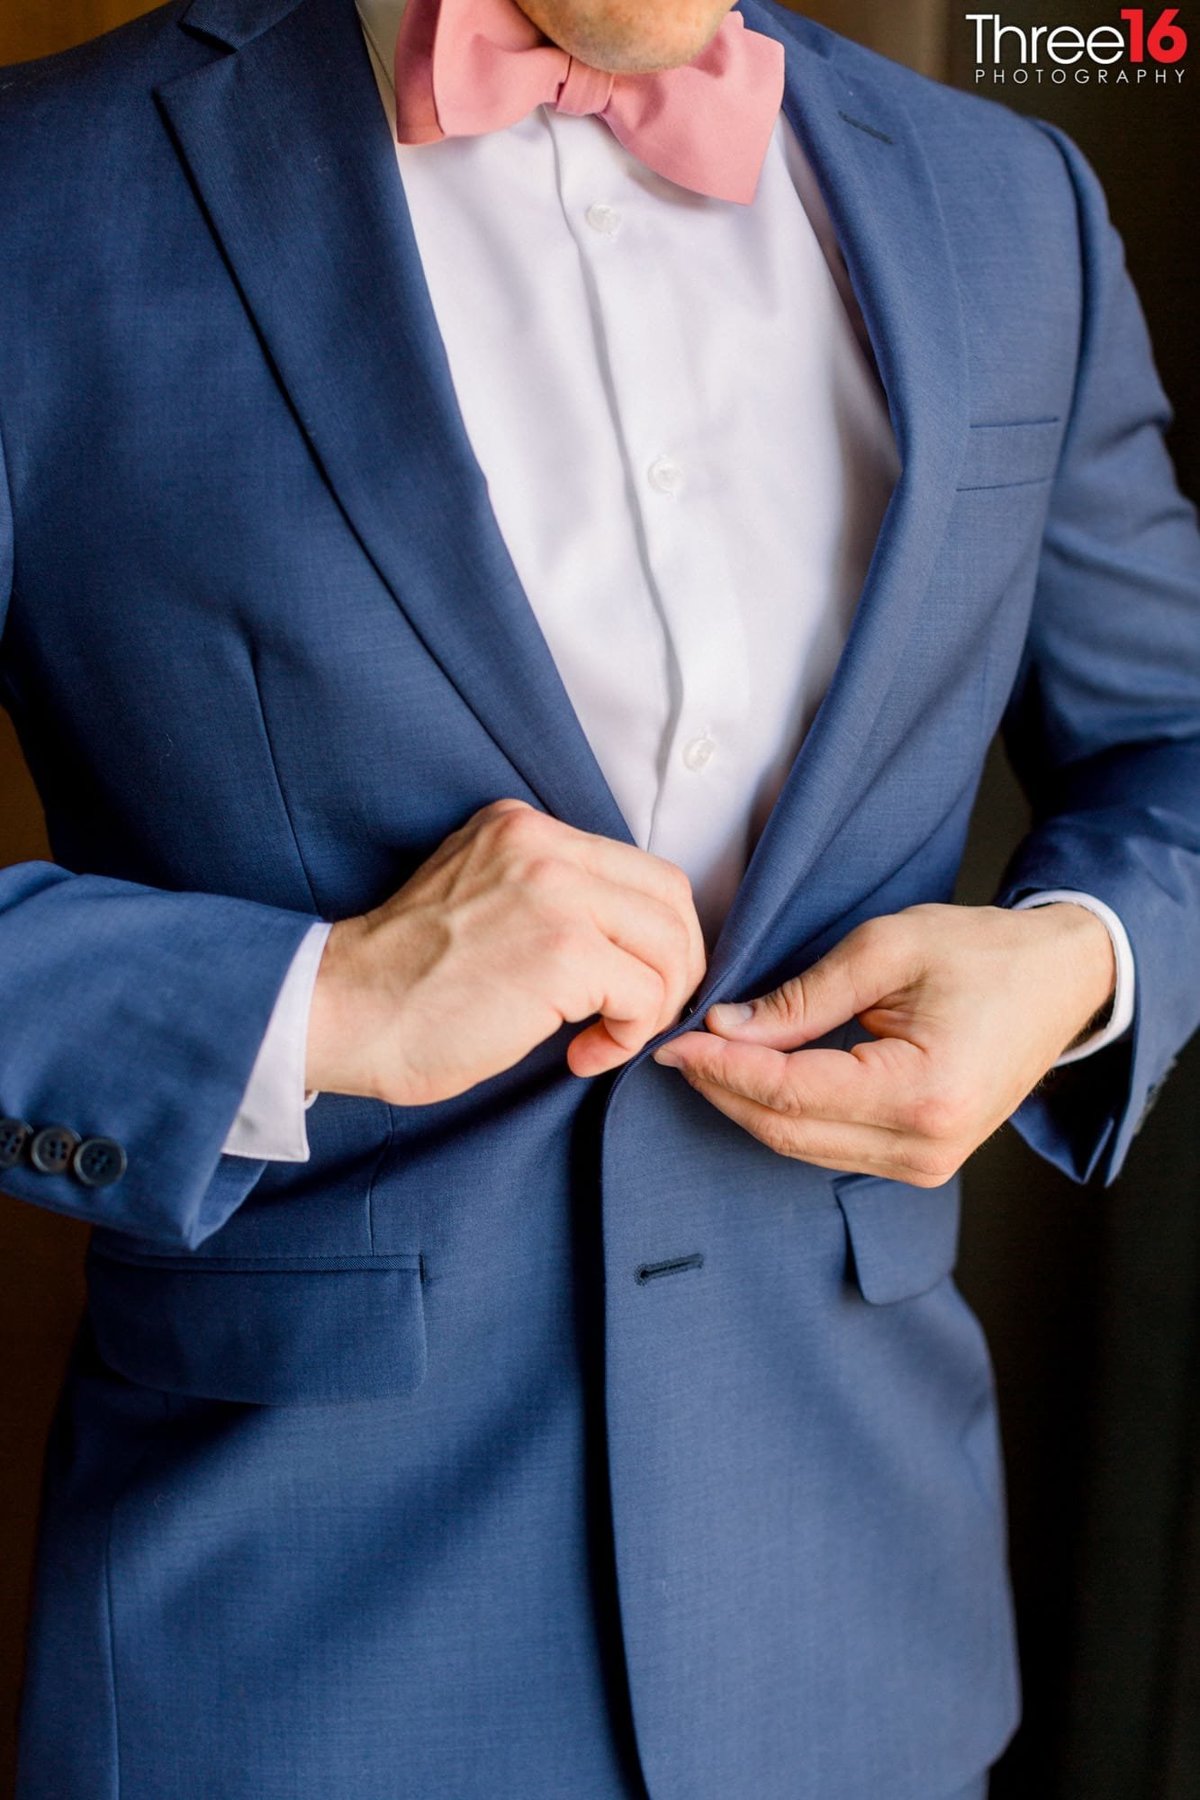 Groom buttoning his coat before the wedding